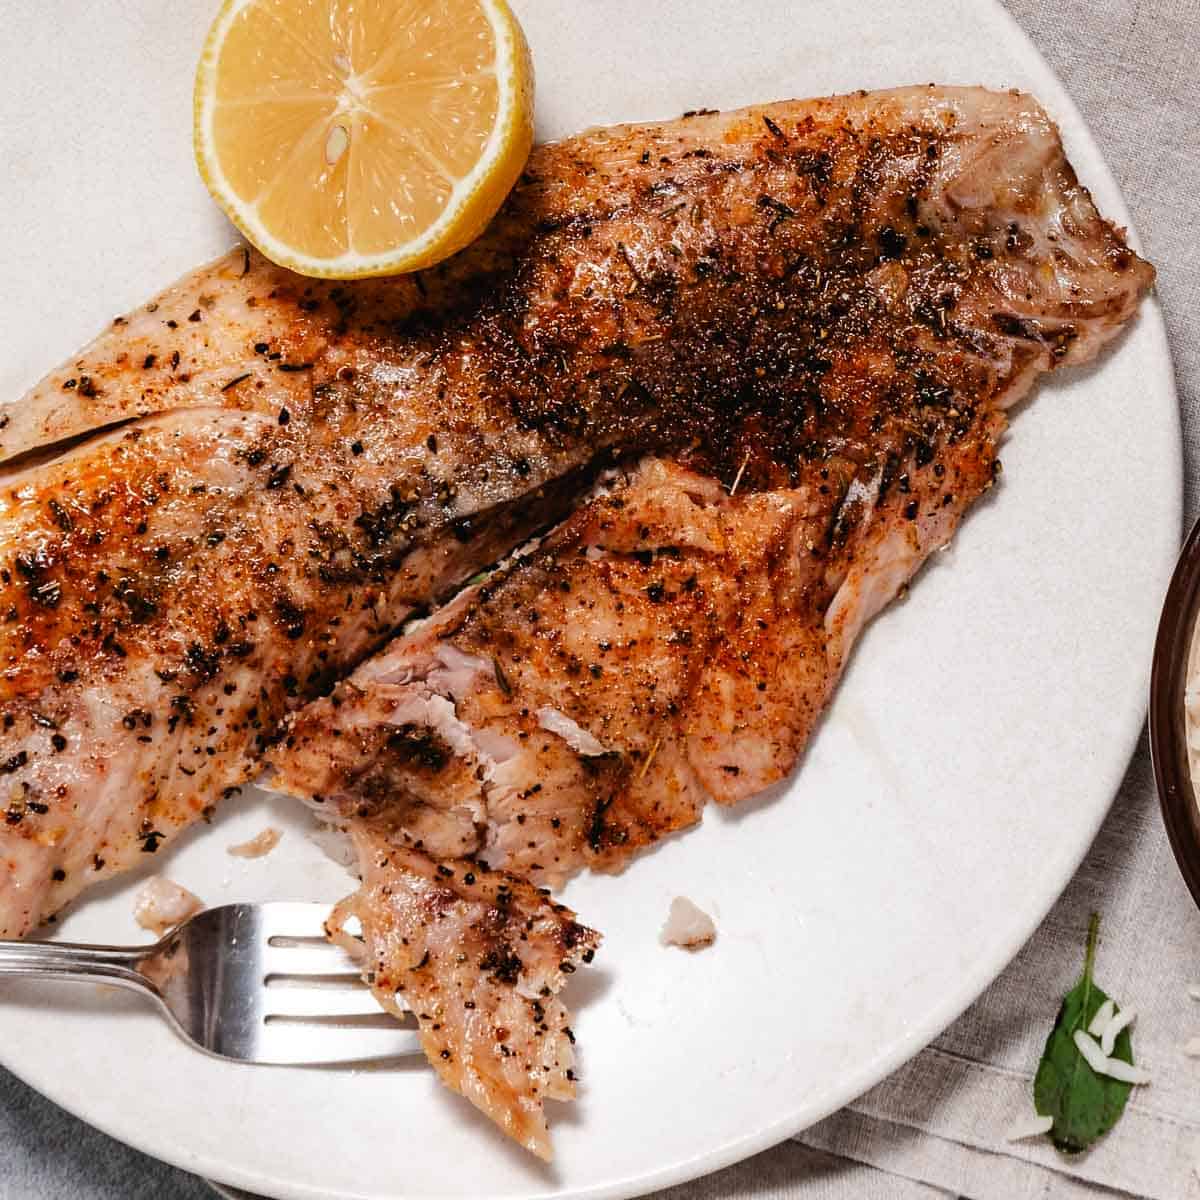 Broiled white fish with a half lemon on a white plate.